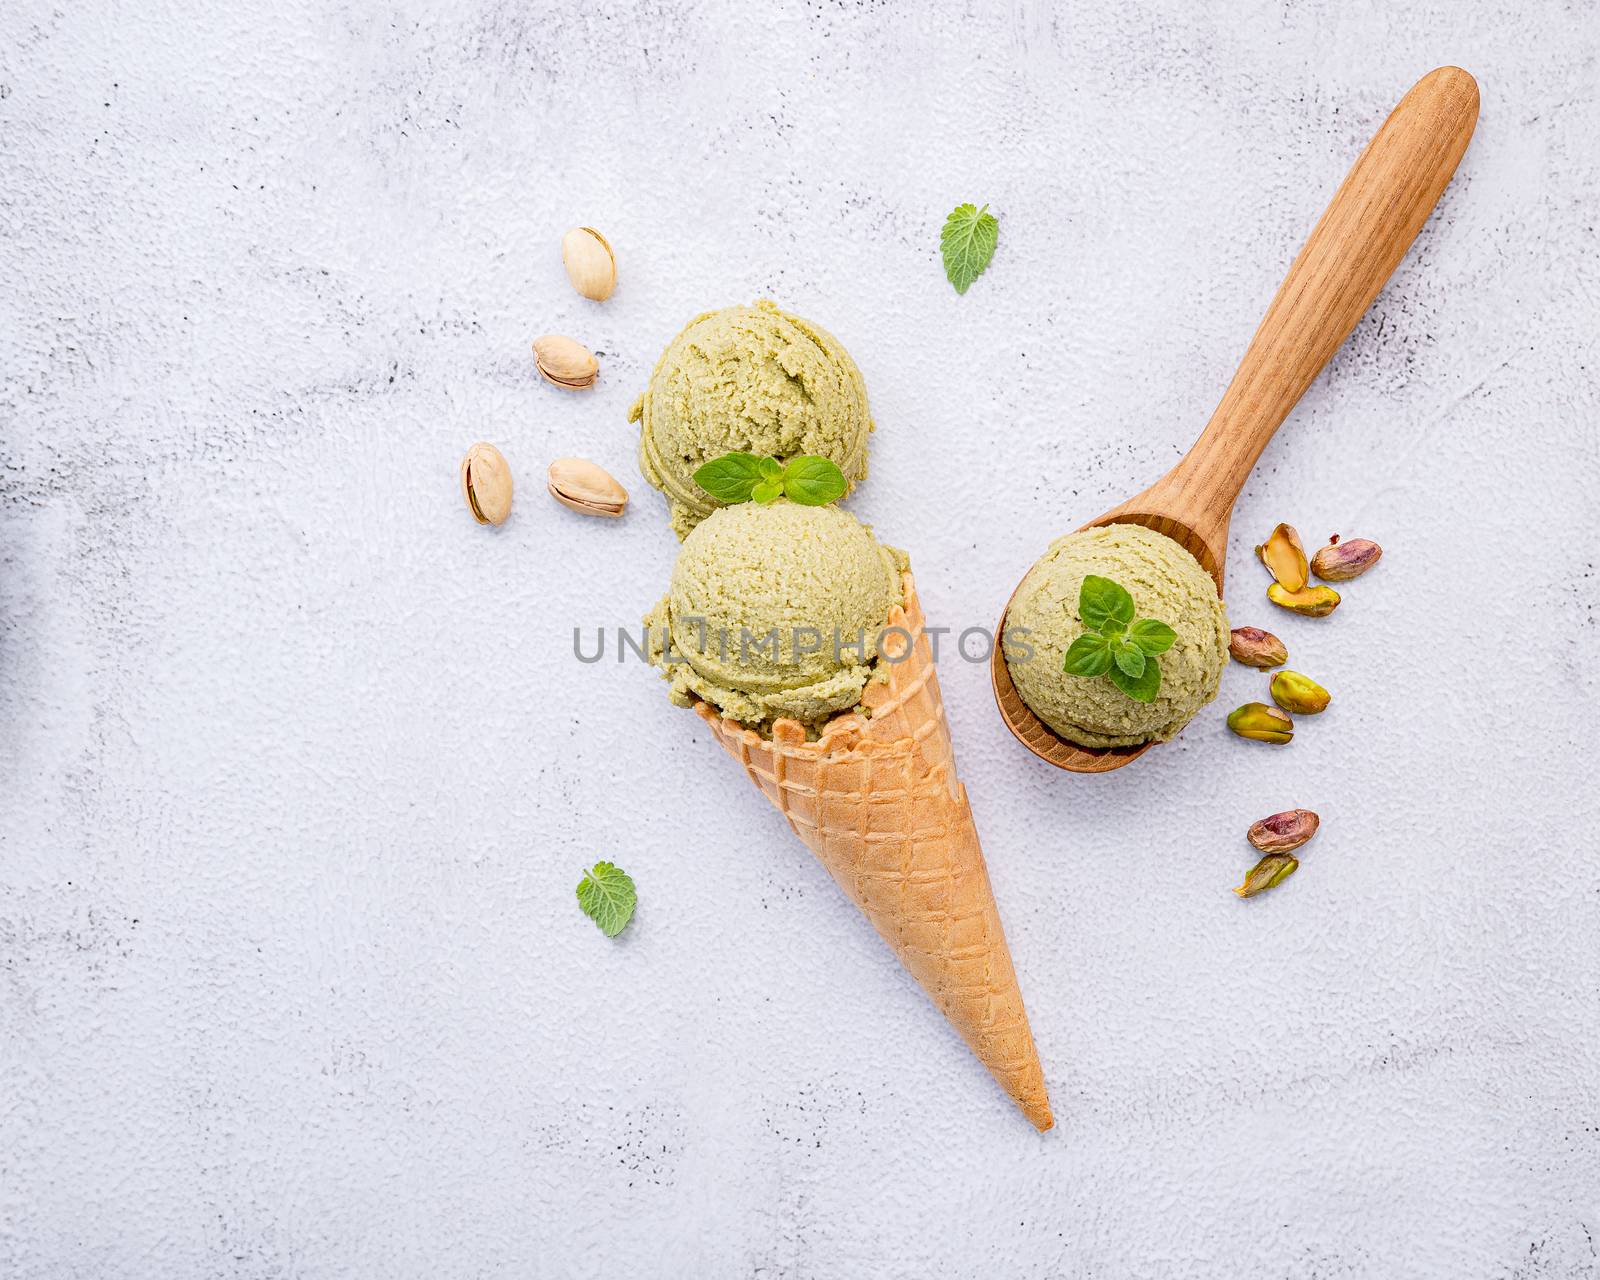 Pistachio ice cream in cones  with pistachio nuts setup on white stone background . Summer and Sweet menu concept.